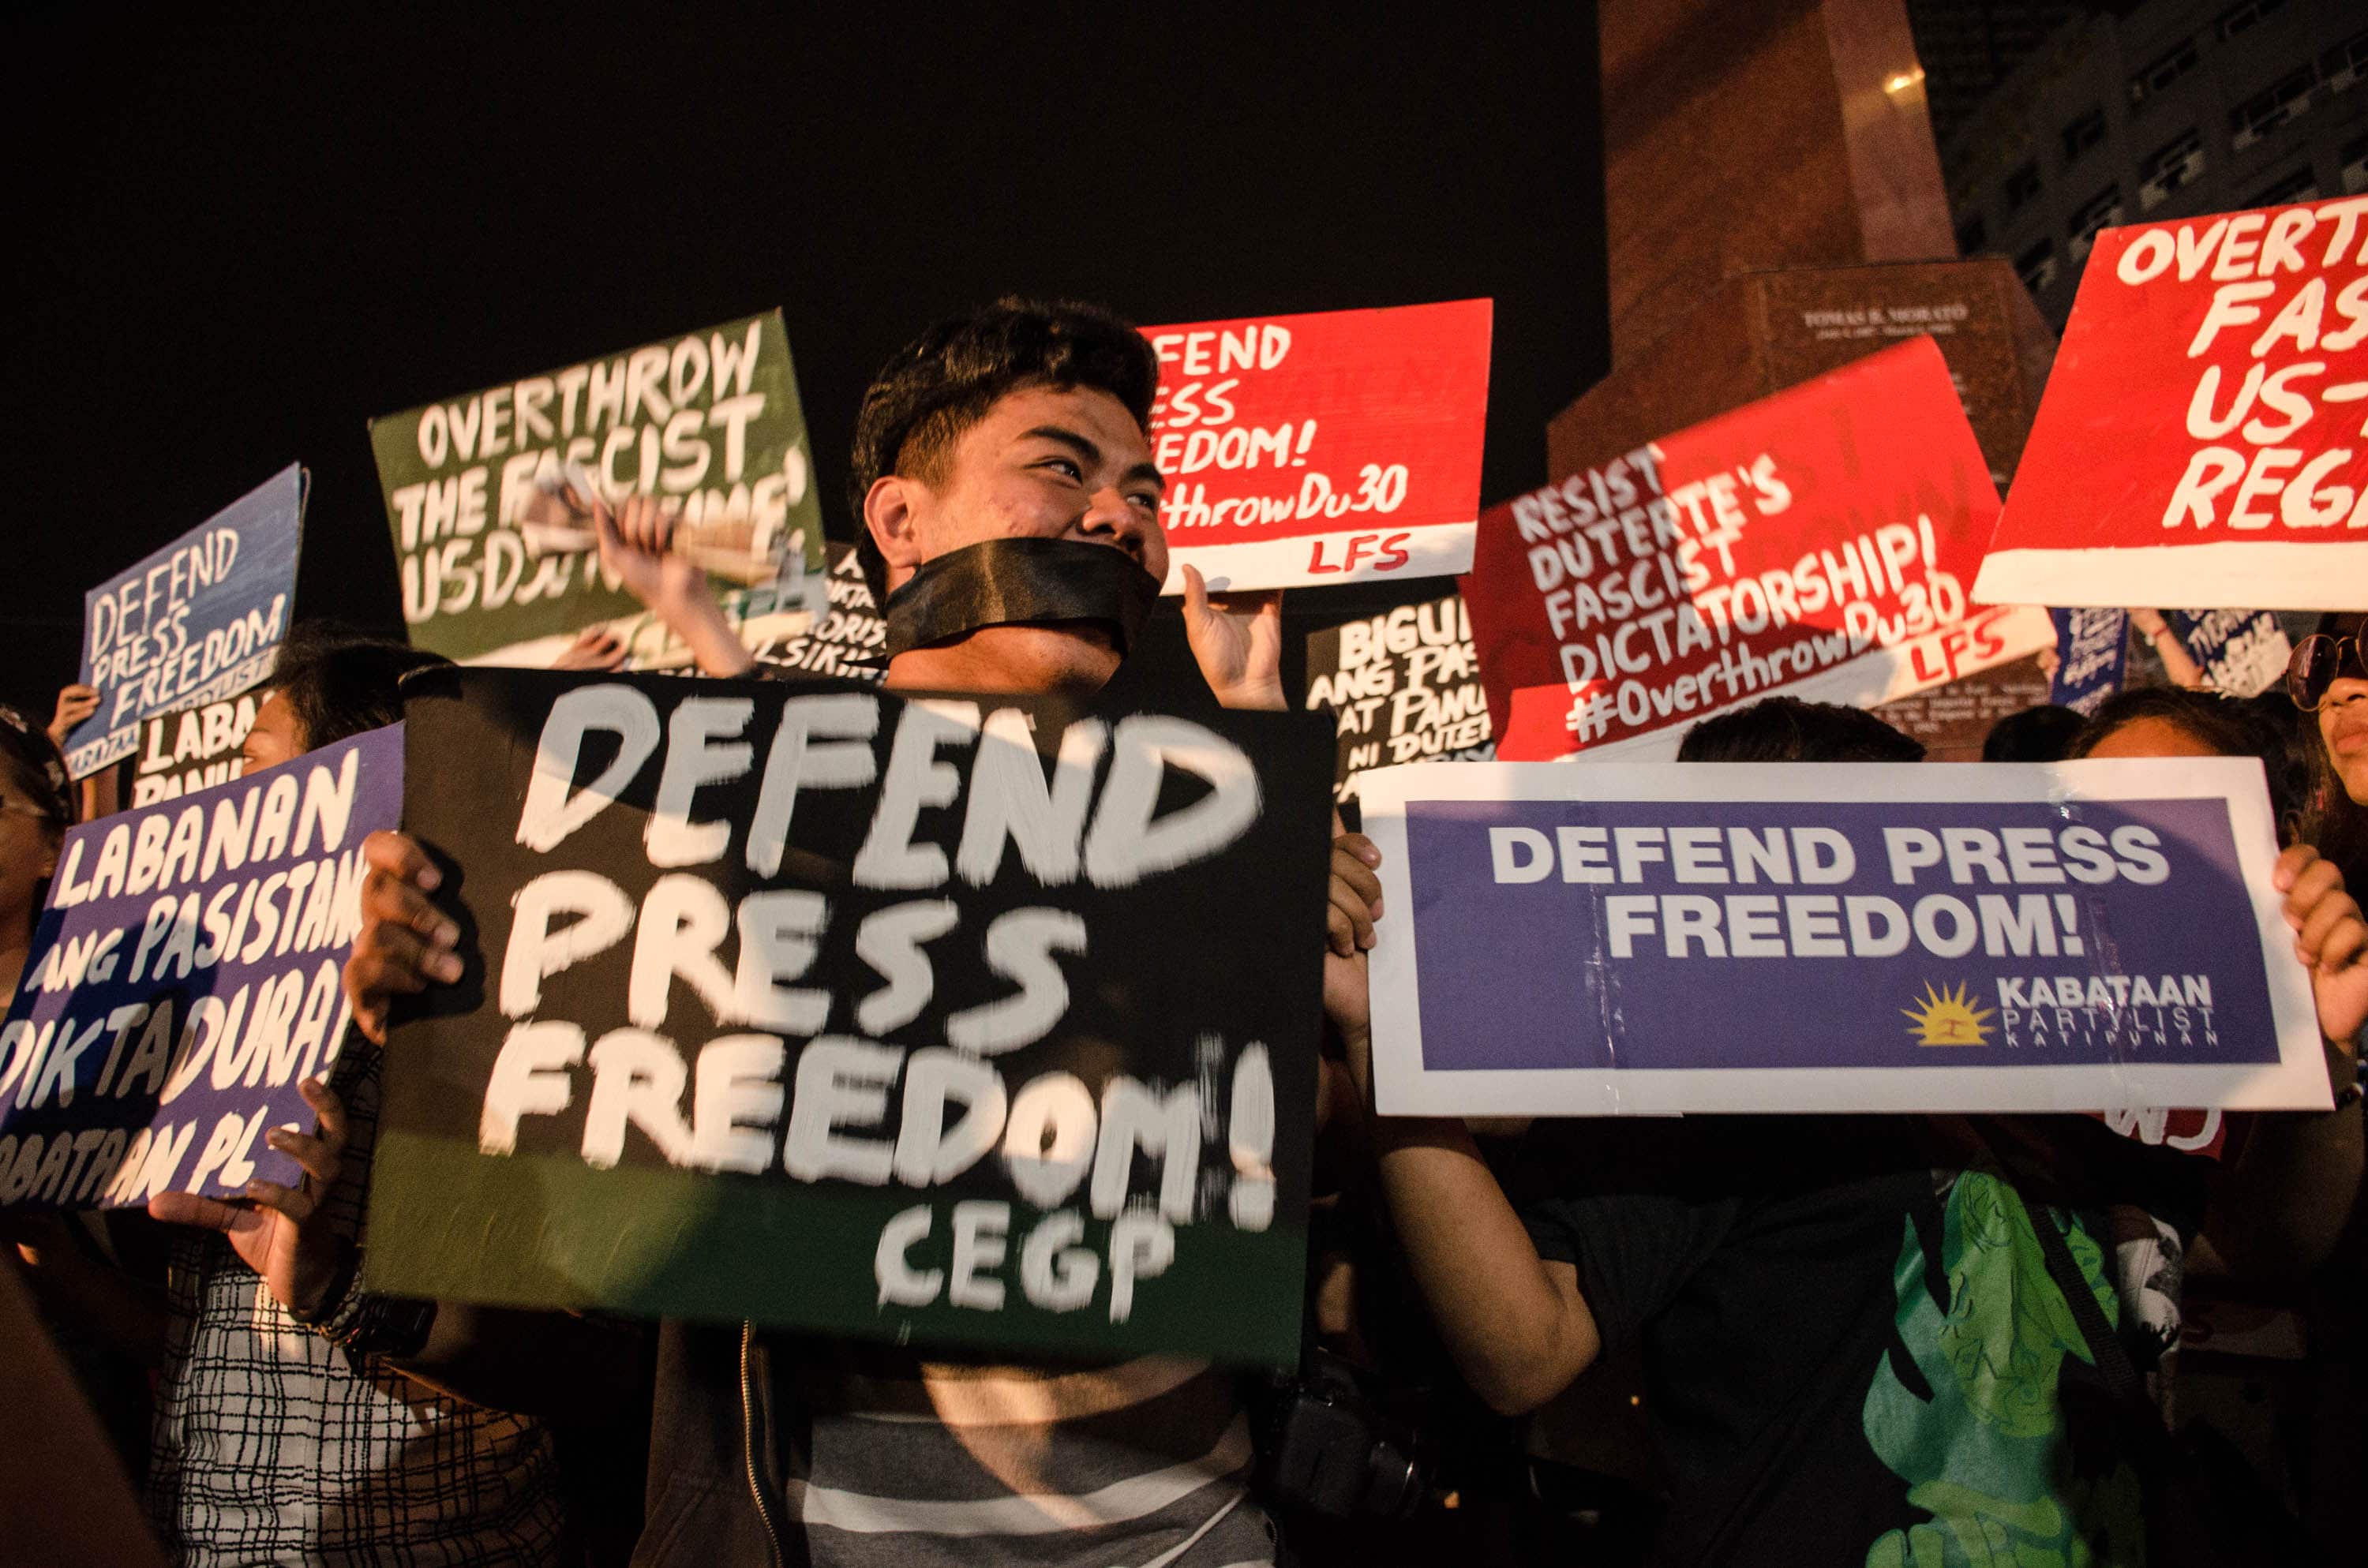 Activists join journalists in a protest against the Security and Commission's move to revoke Rappler's license, Bernice Beltran/NurPhoto via Getty Images